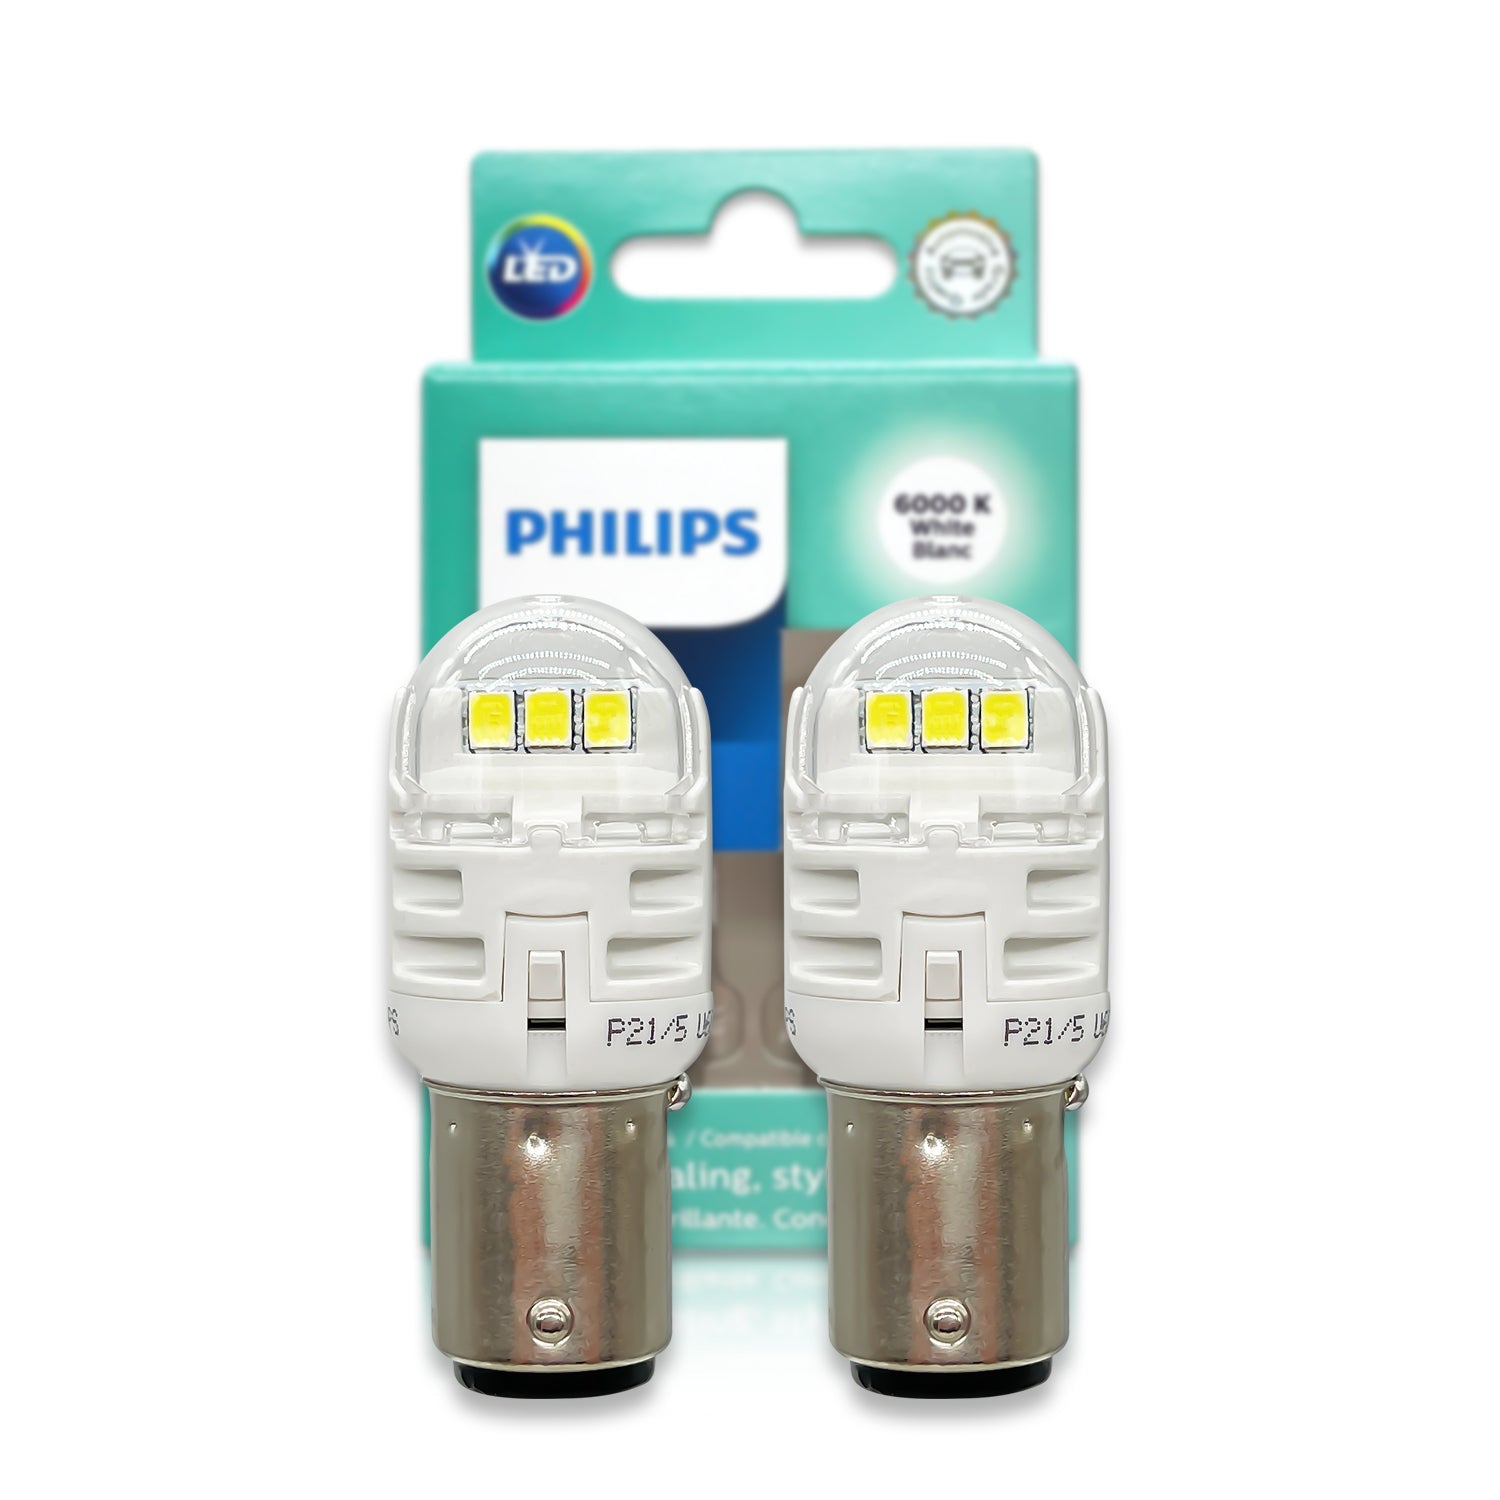 Philips Pro5100 H1 Low Beam + Philips LED T10 for Honda Accord EURO CU2 CL9